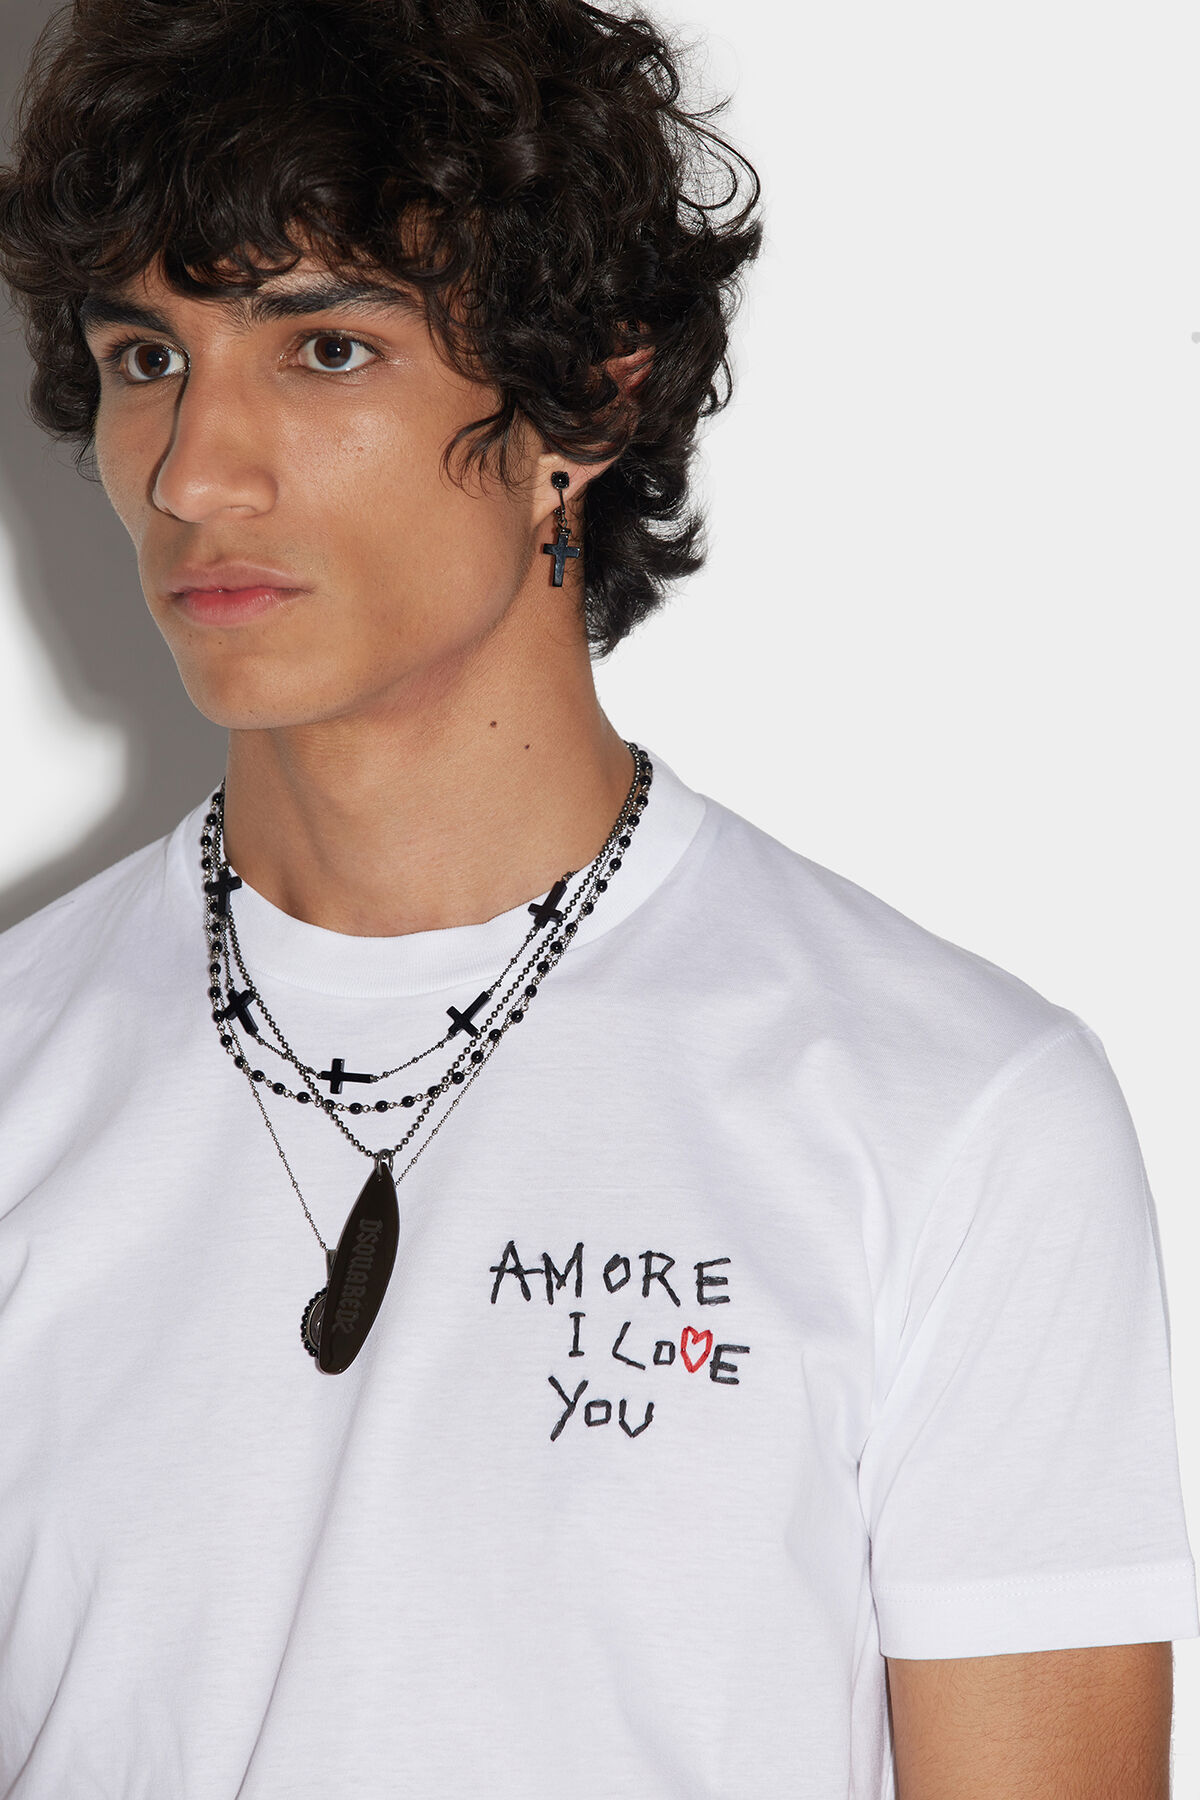 DSQUARED2 - AMORE I LOVE YOU COOL T-SHIRT - NEW TREND